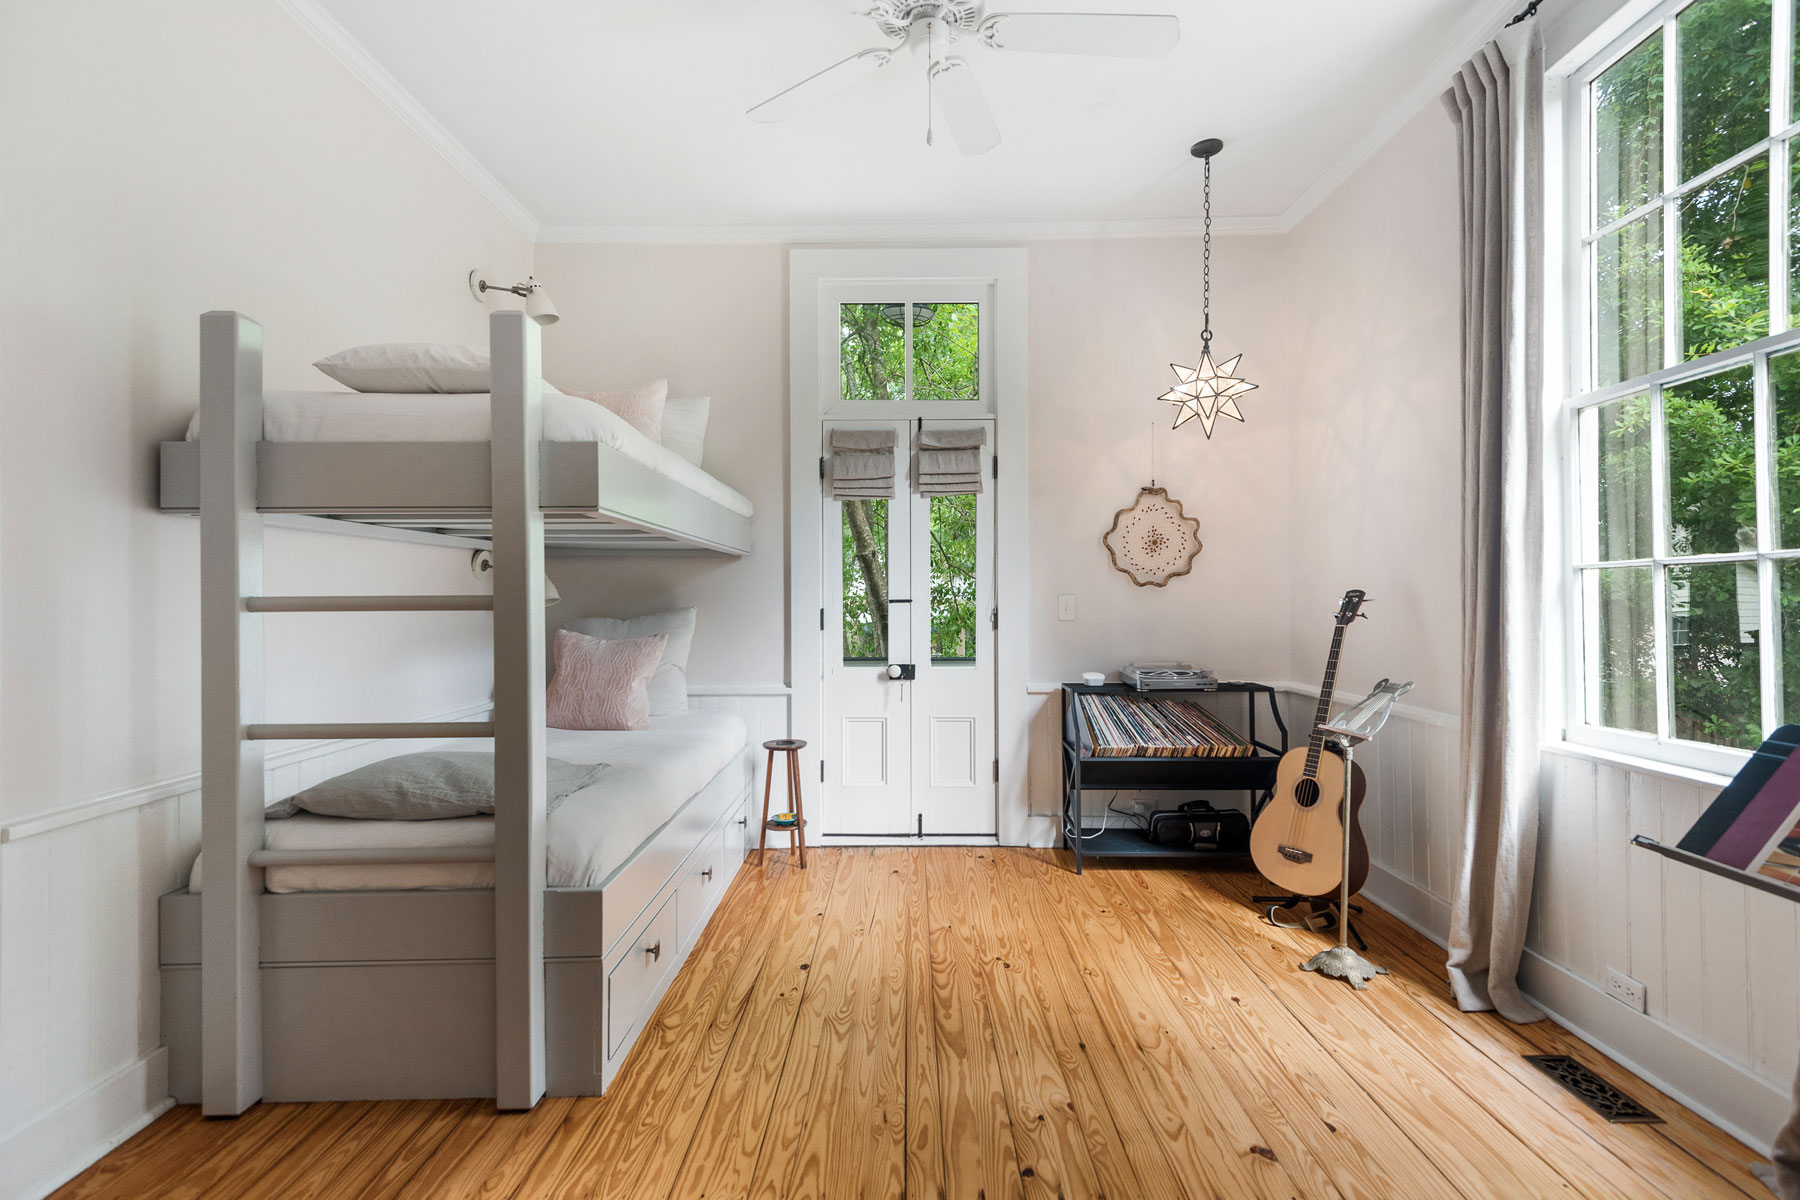 Secondary child's bedroom with bunk bed and high ceilings